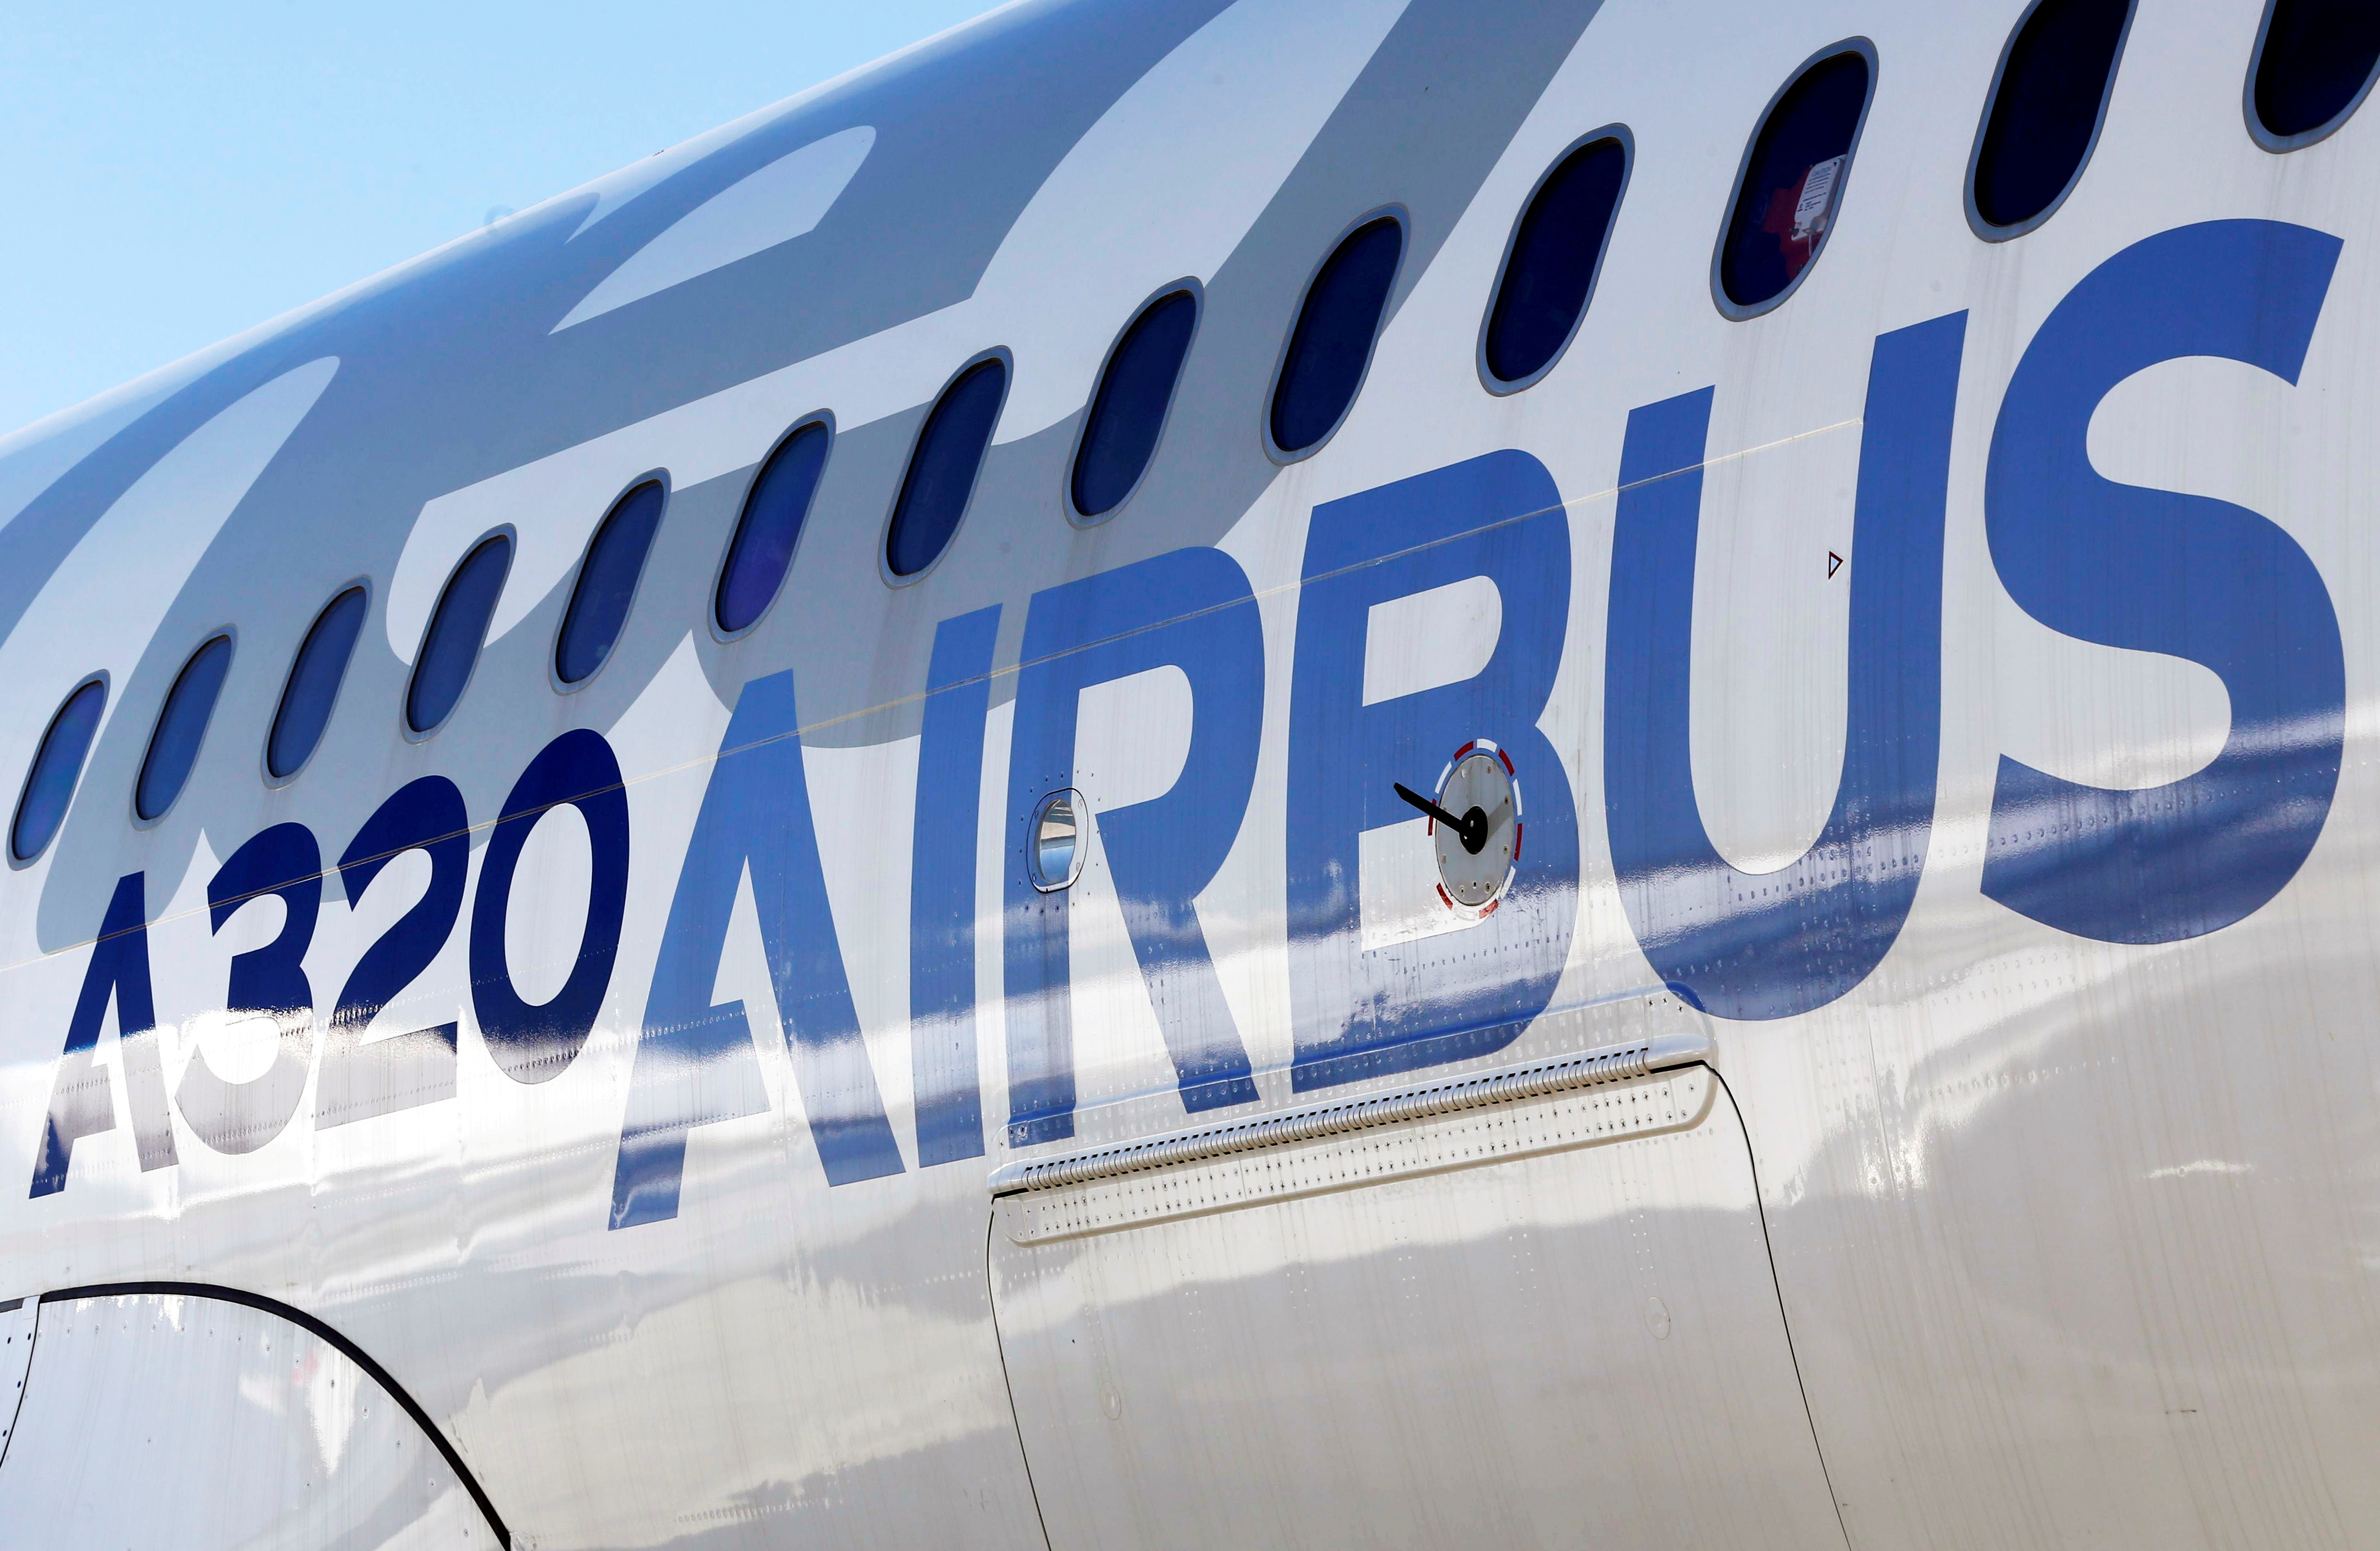 FILE PHOTO: An Airbus A320neo aircraft is pictured during a news conference to announce a partnership between Airbus and Bombardier on the C Series aircraft programme, in Colomiers near Toulouse